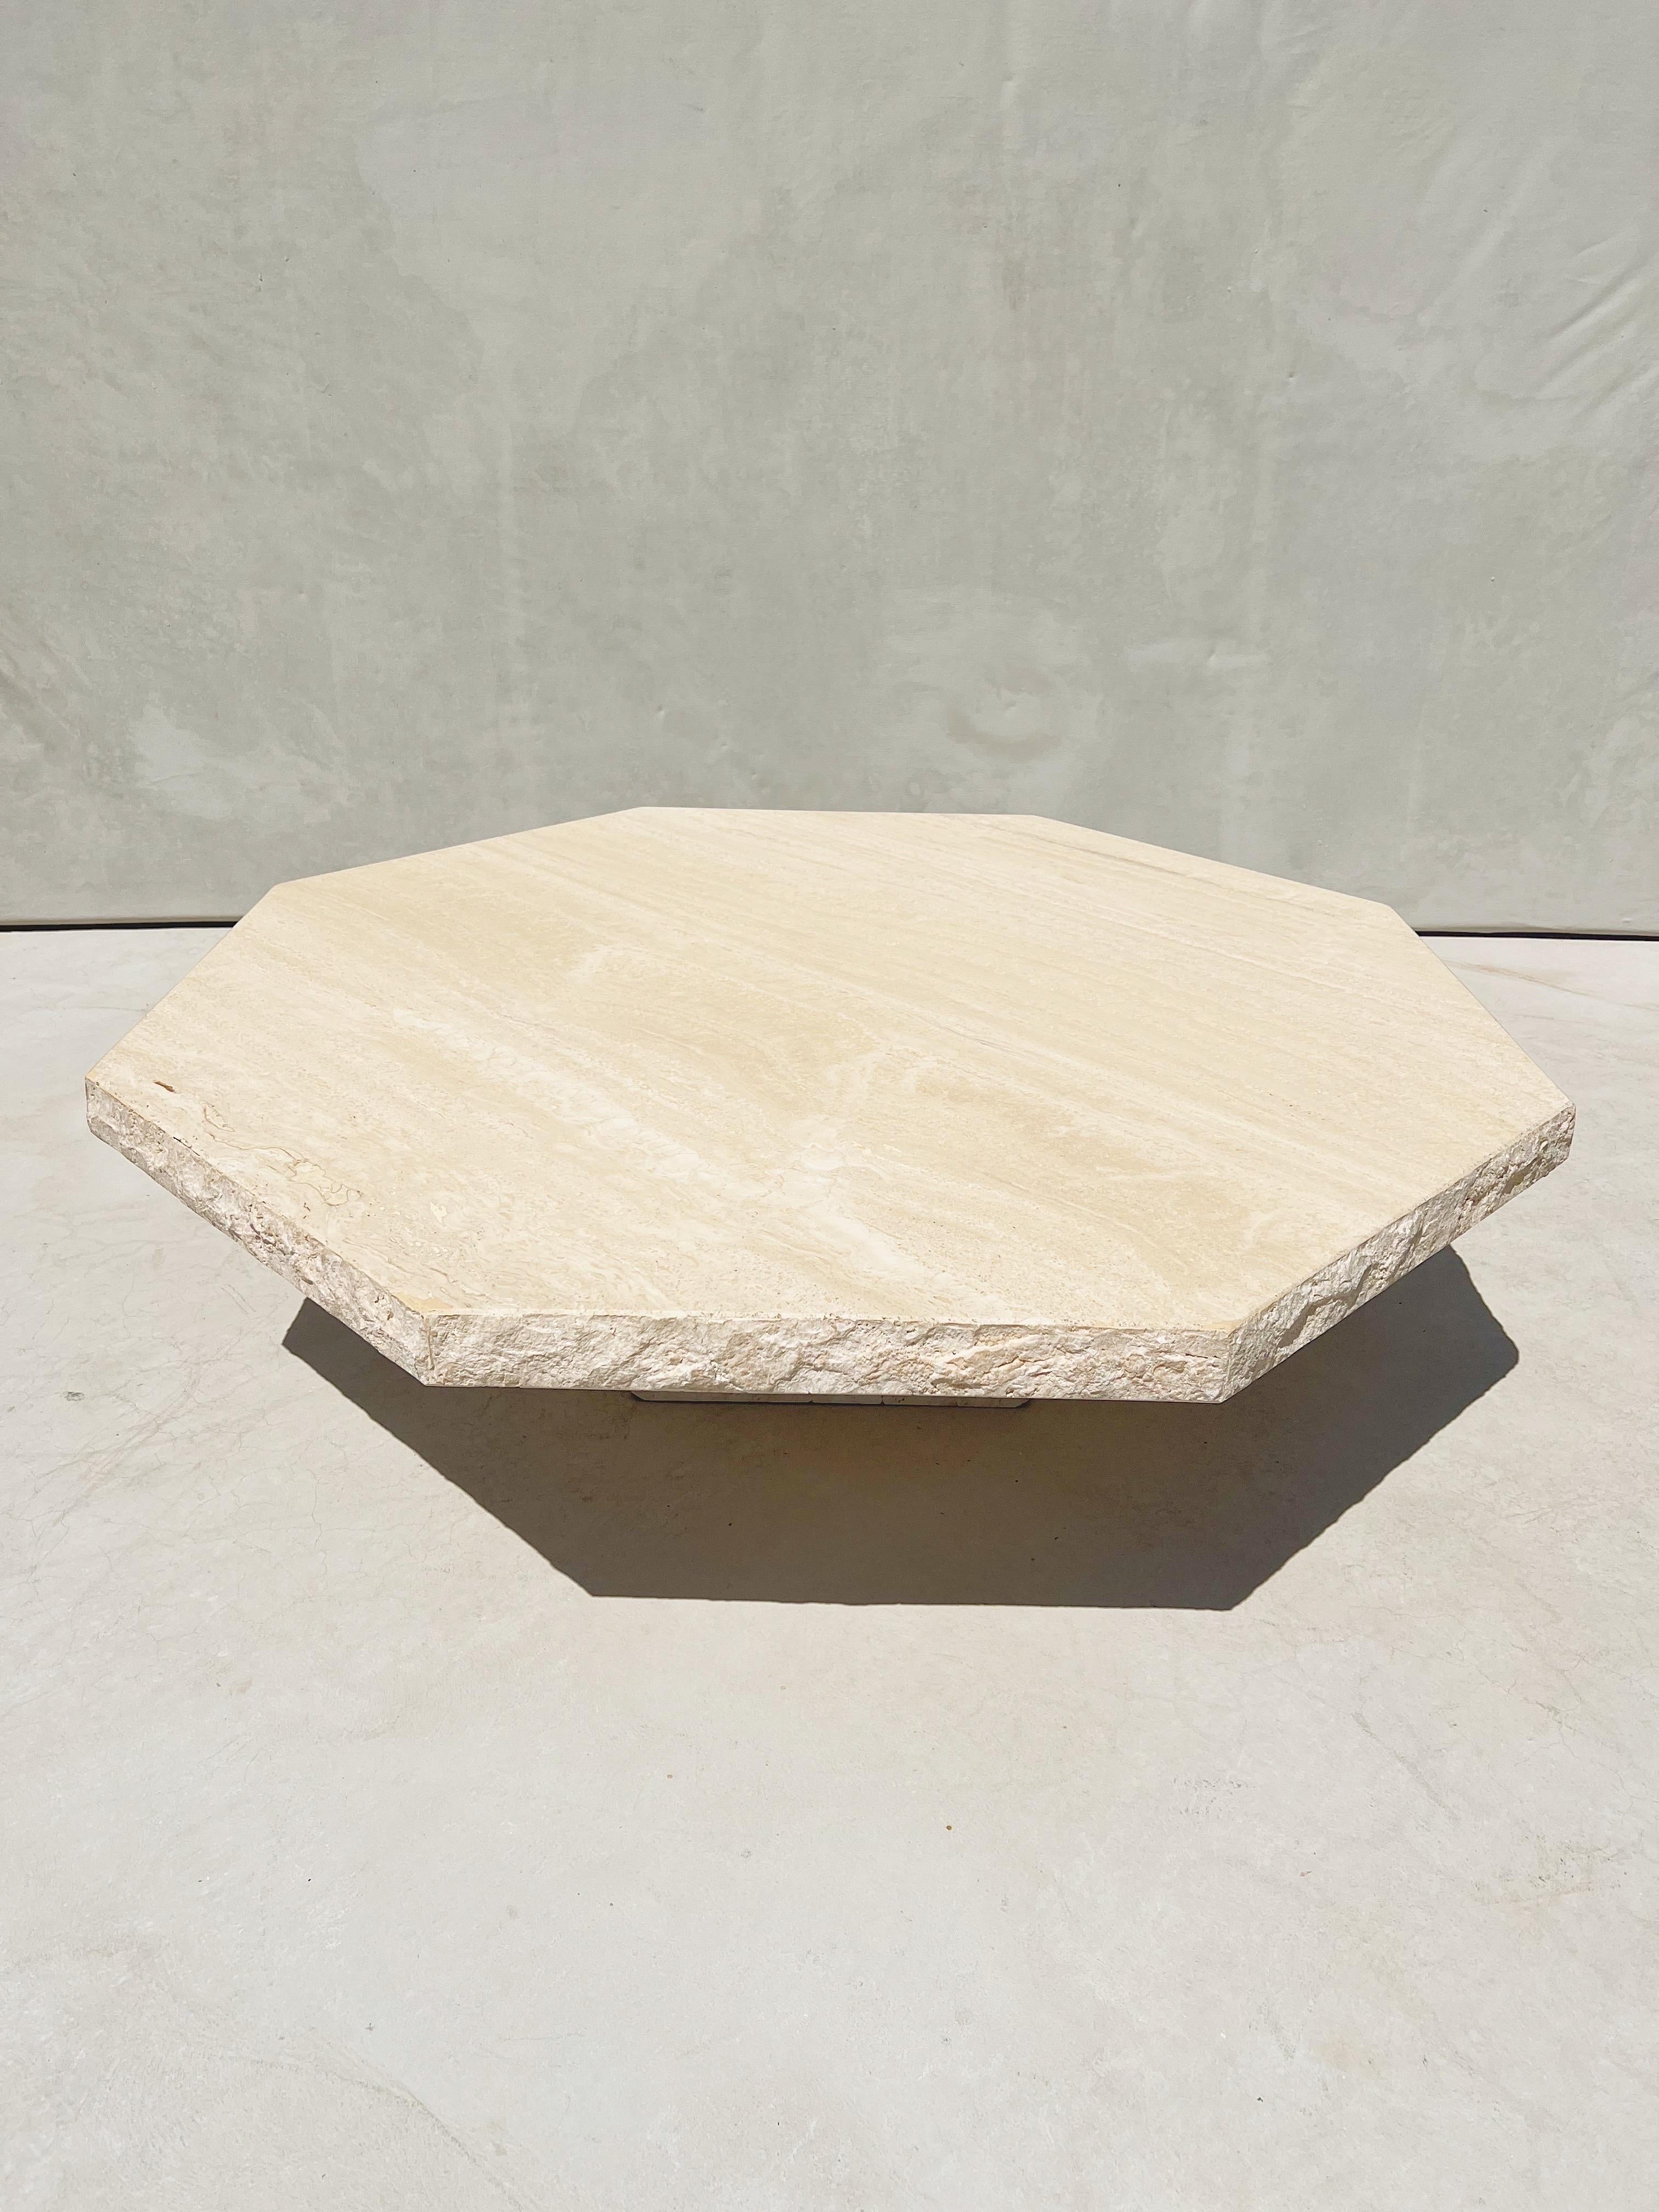 A vintage Italian travertine octagonal shaped coffee table. 

Showcasing an organic, porous, naturally textured and polished travertine base and a smooth, freshly polished and newly sealed top accented with live textured edges.

Milky, wavy,